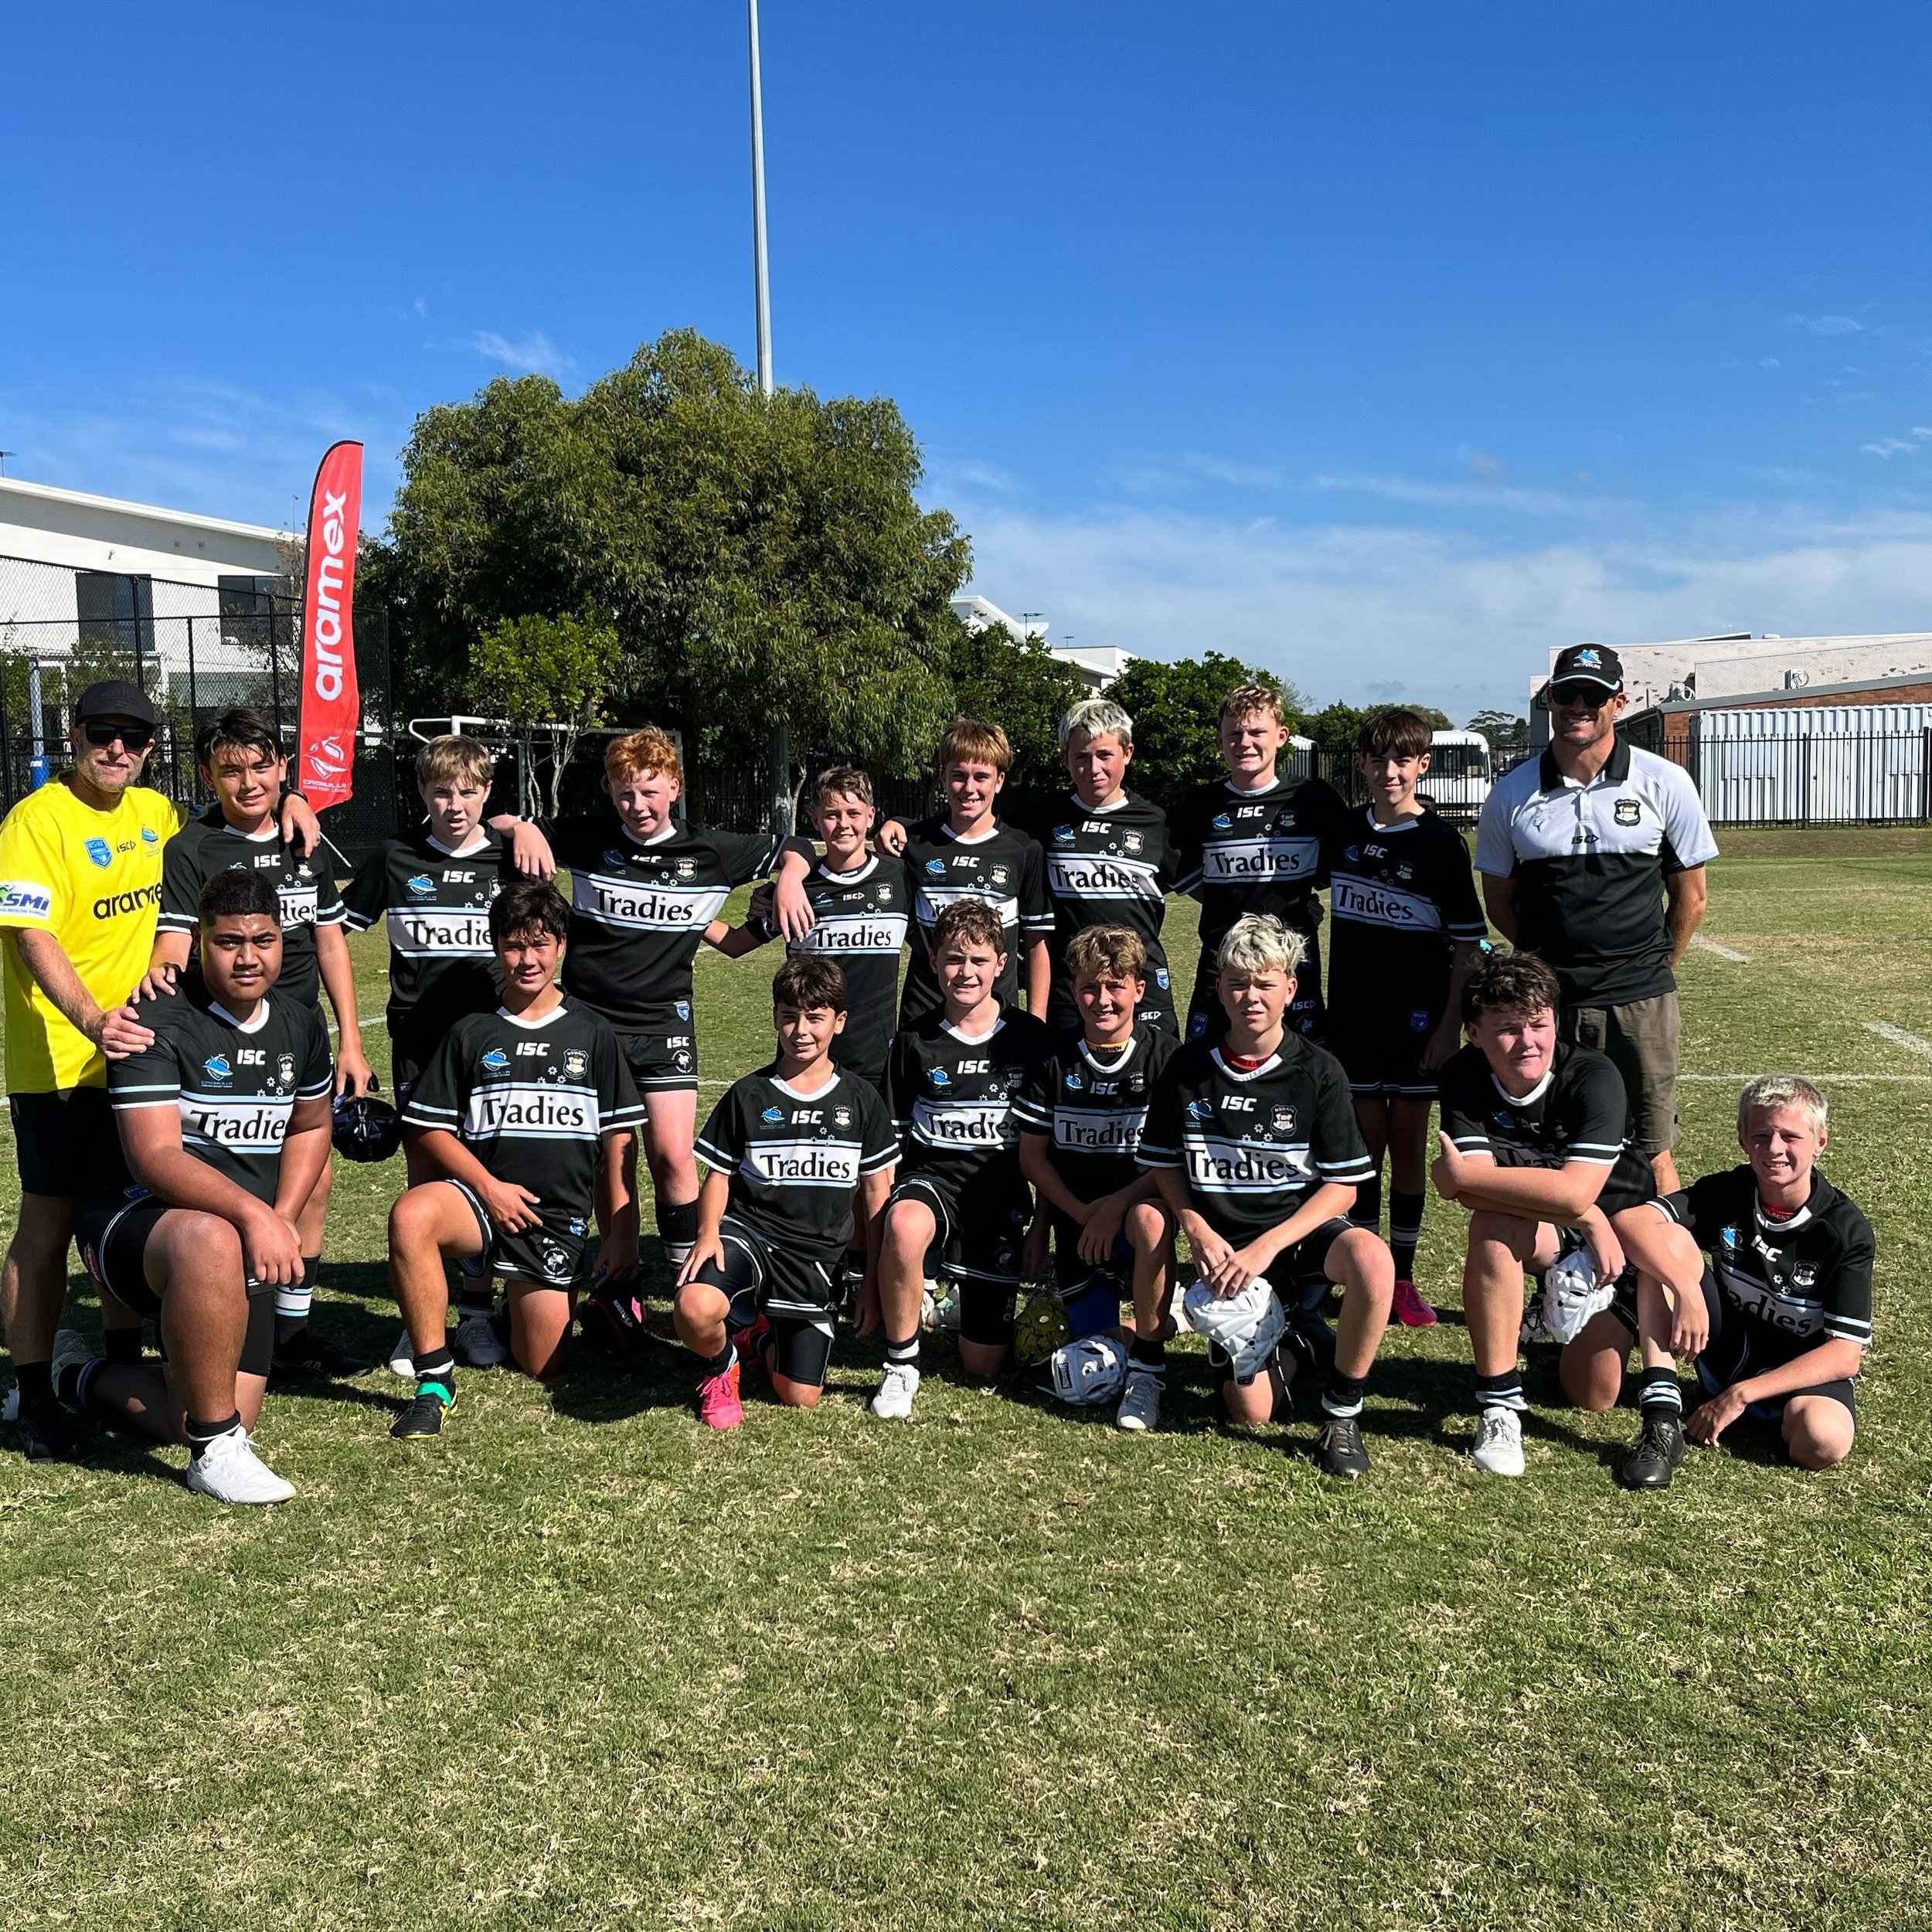 A great effort from our u14silver team getting the win today. #ccsharks ⚫️⚪️🦈🏉 @tradiesclub 👏👏